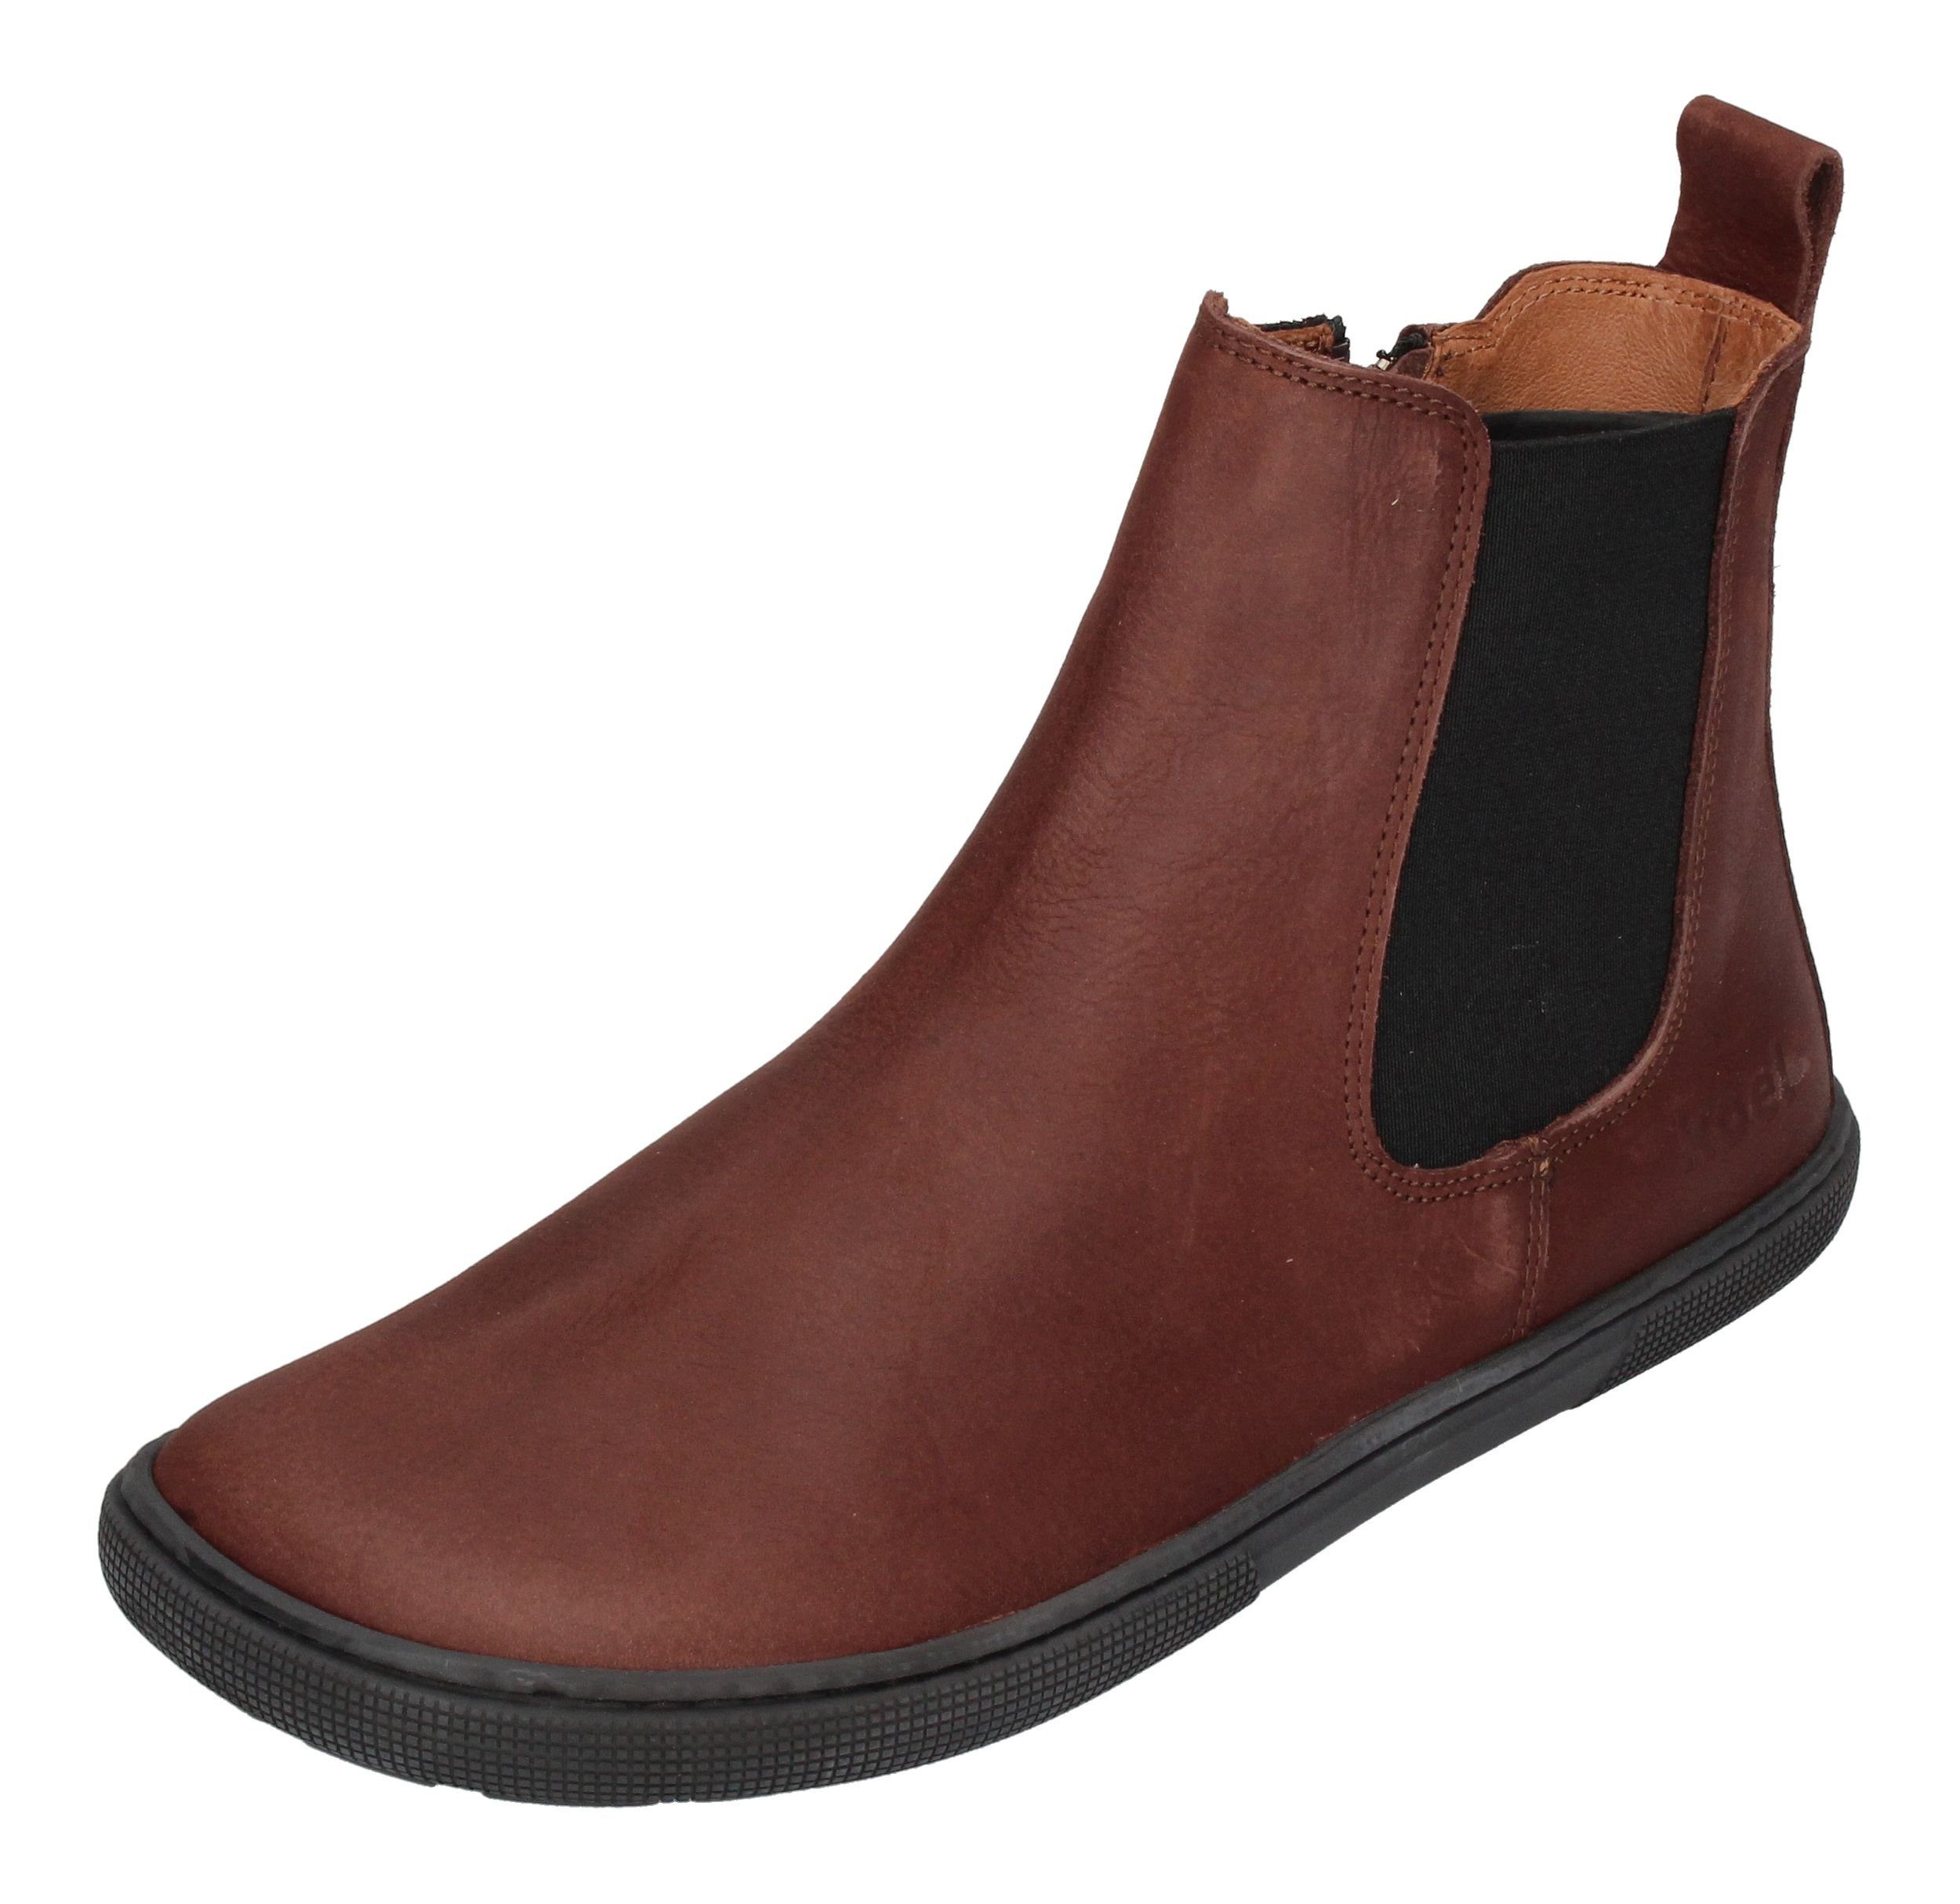 KOEL Chocolate Chelseaboots Hydro 08L009.231-510 Filas